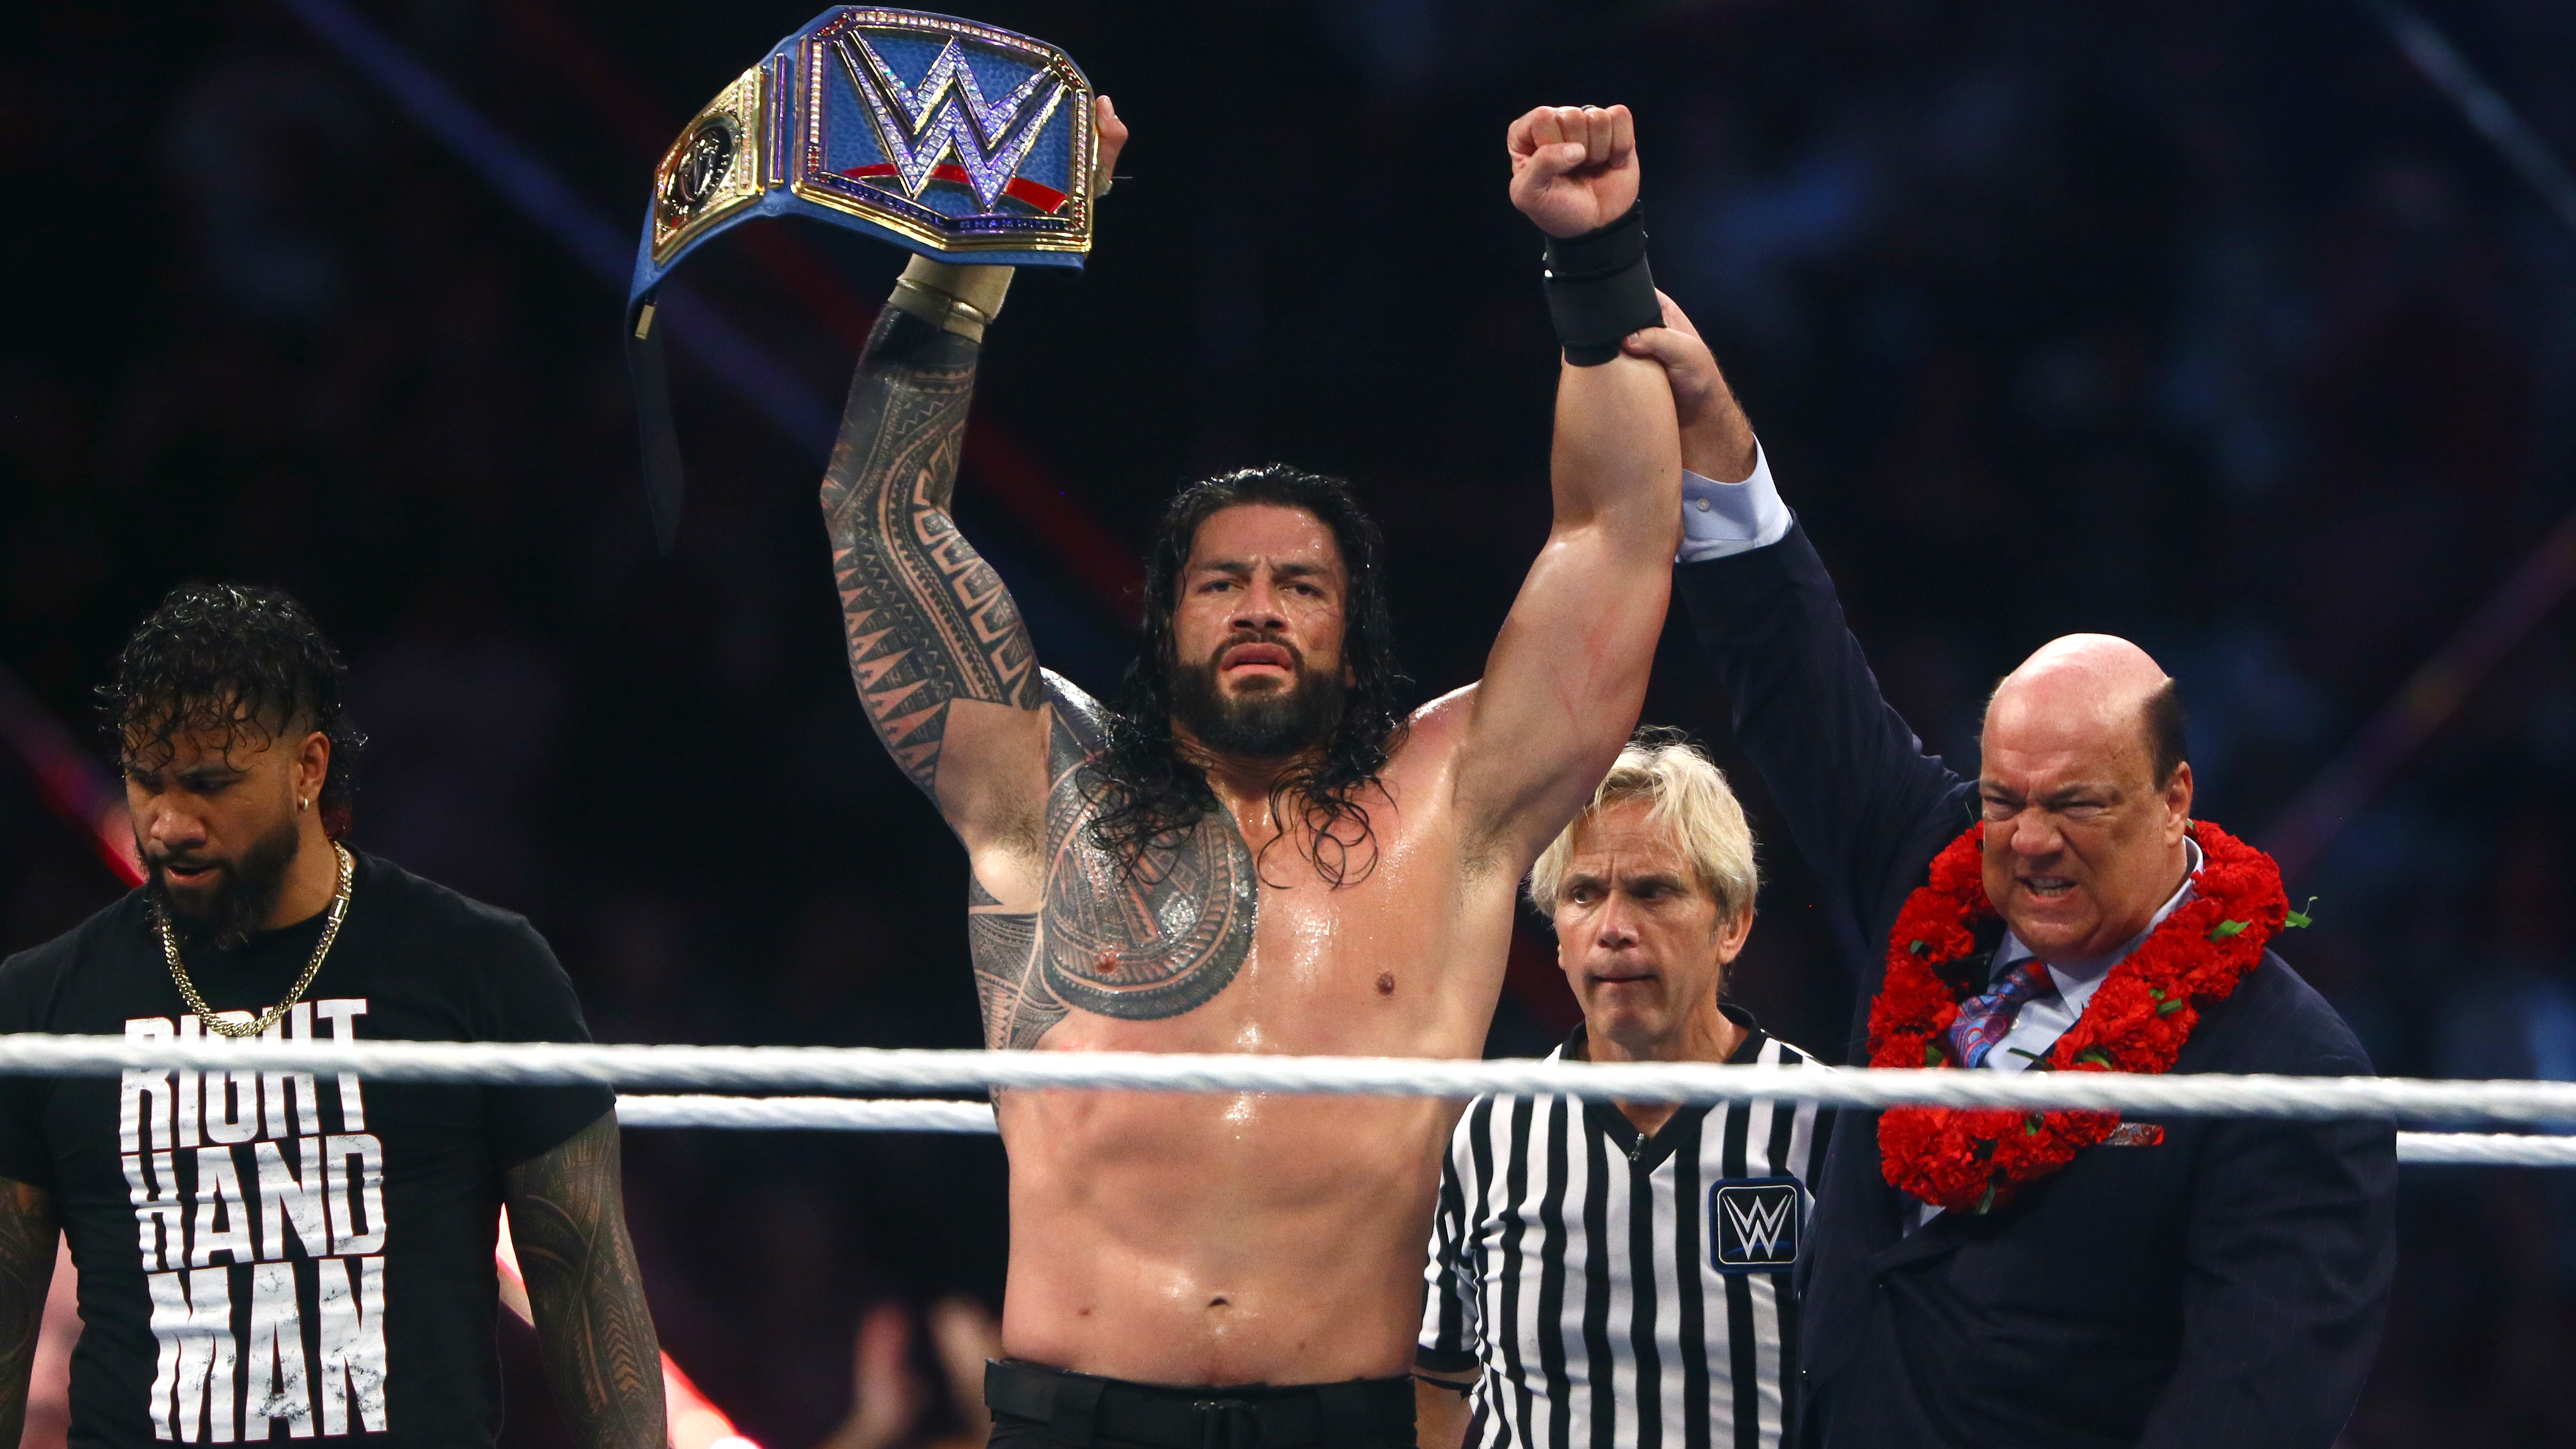 Roman Reigns embraces new heel role at WrestleMania, retains WWE Universal ...